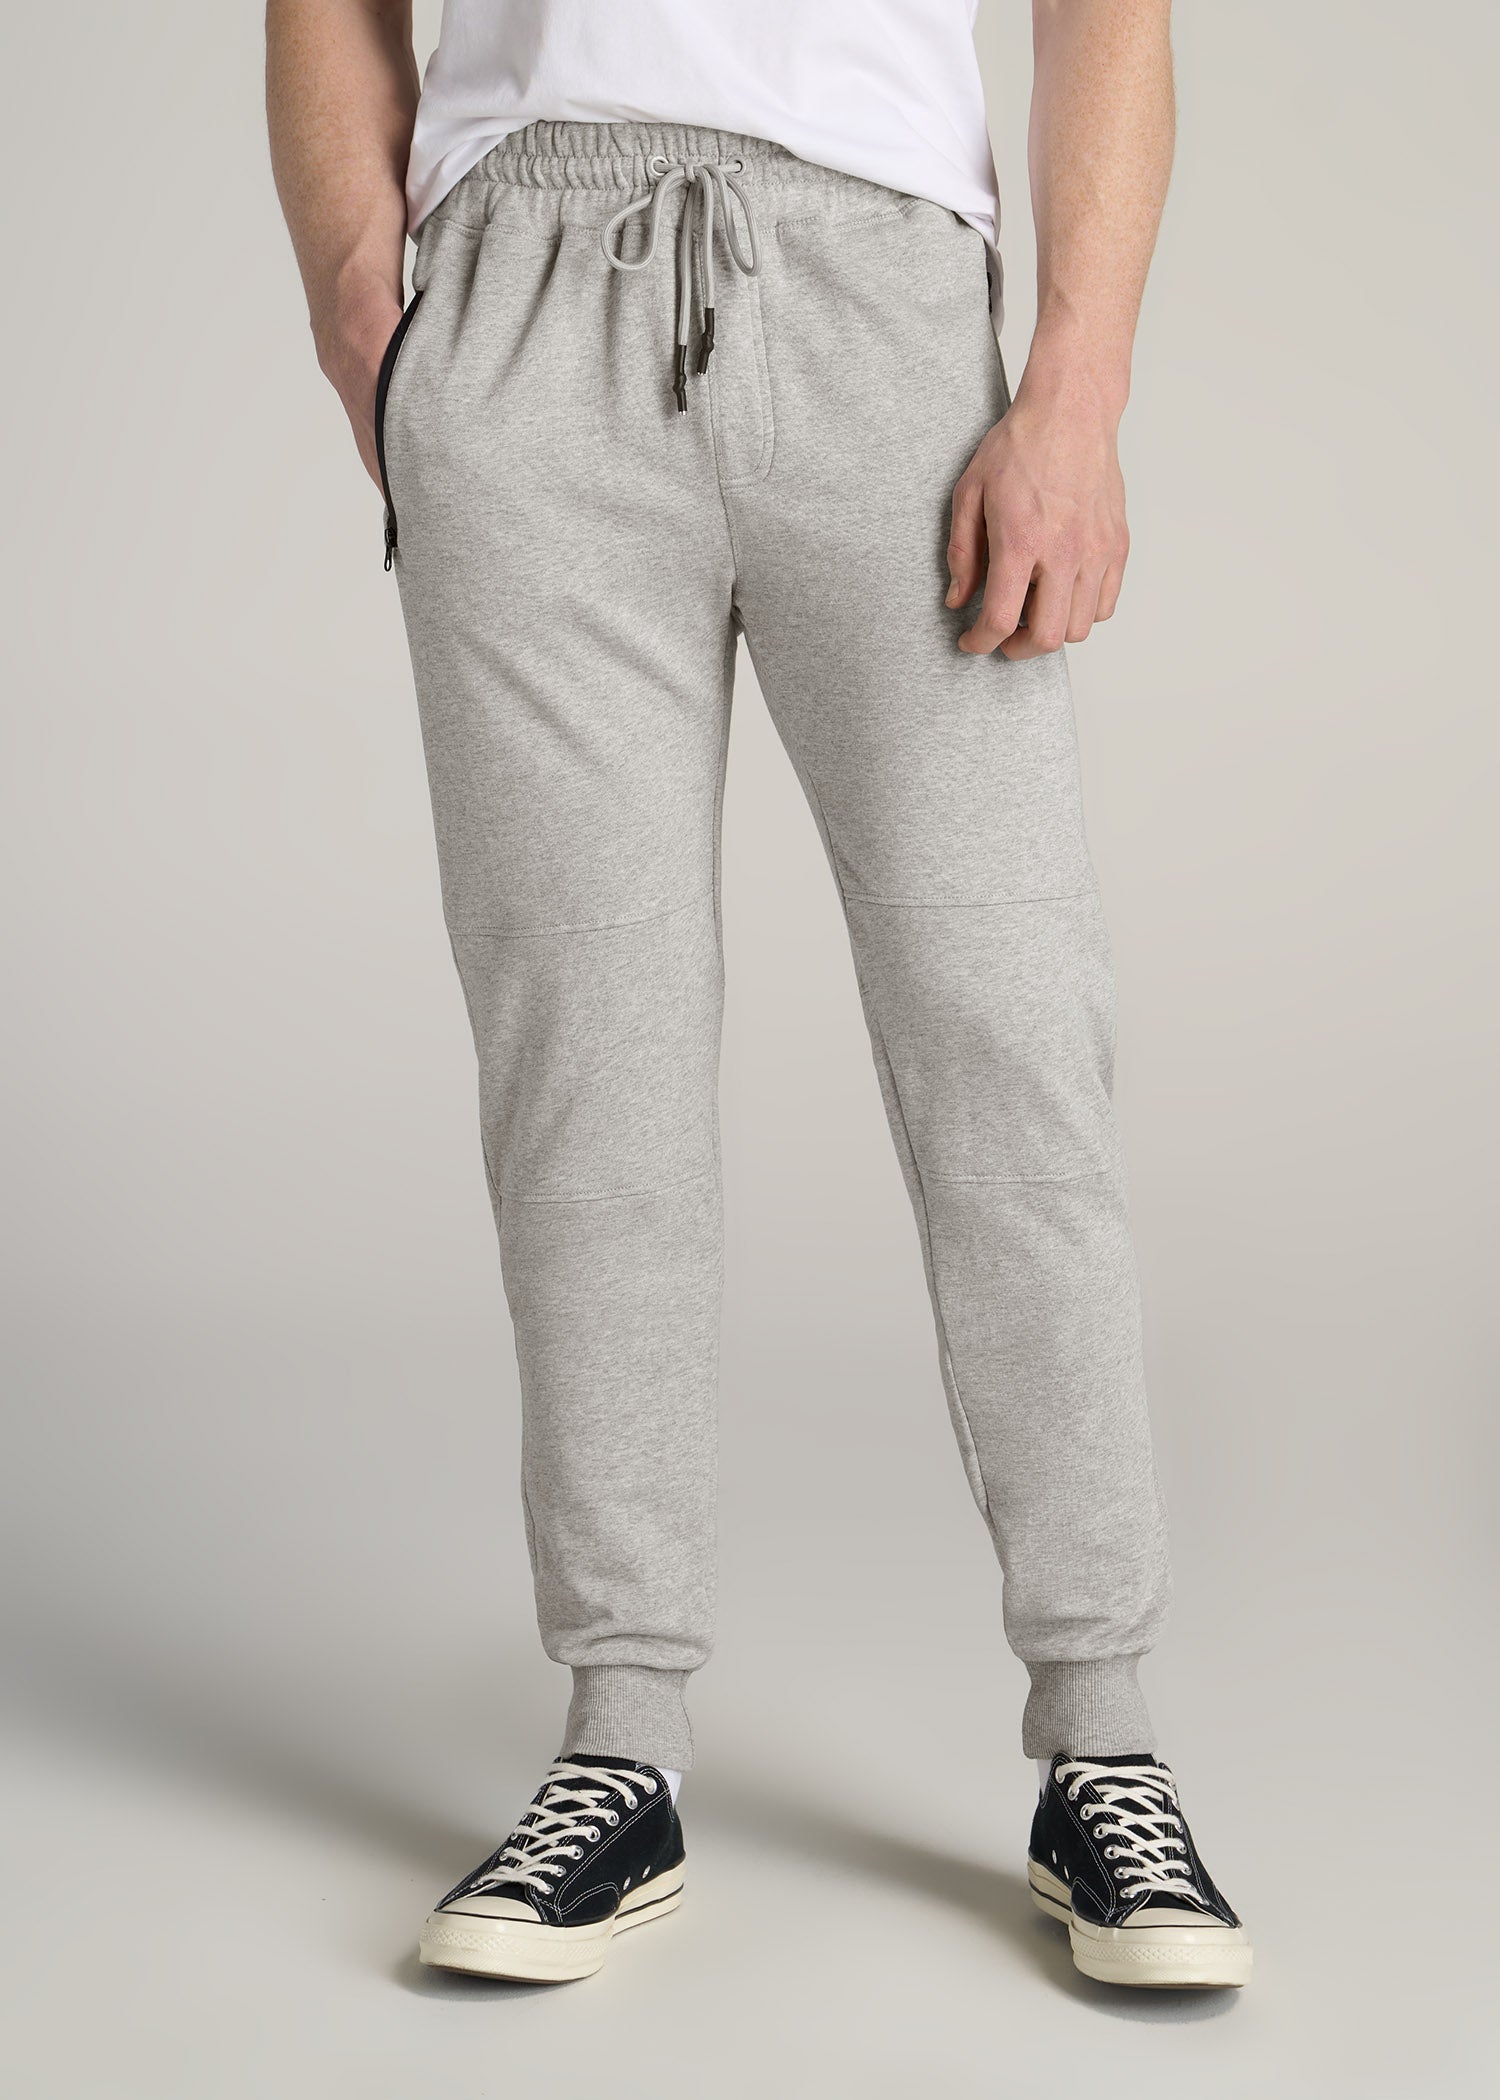 Wearever French Terry Men's Tall Joggers in Grey Mix